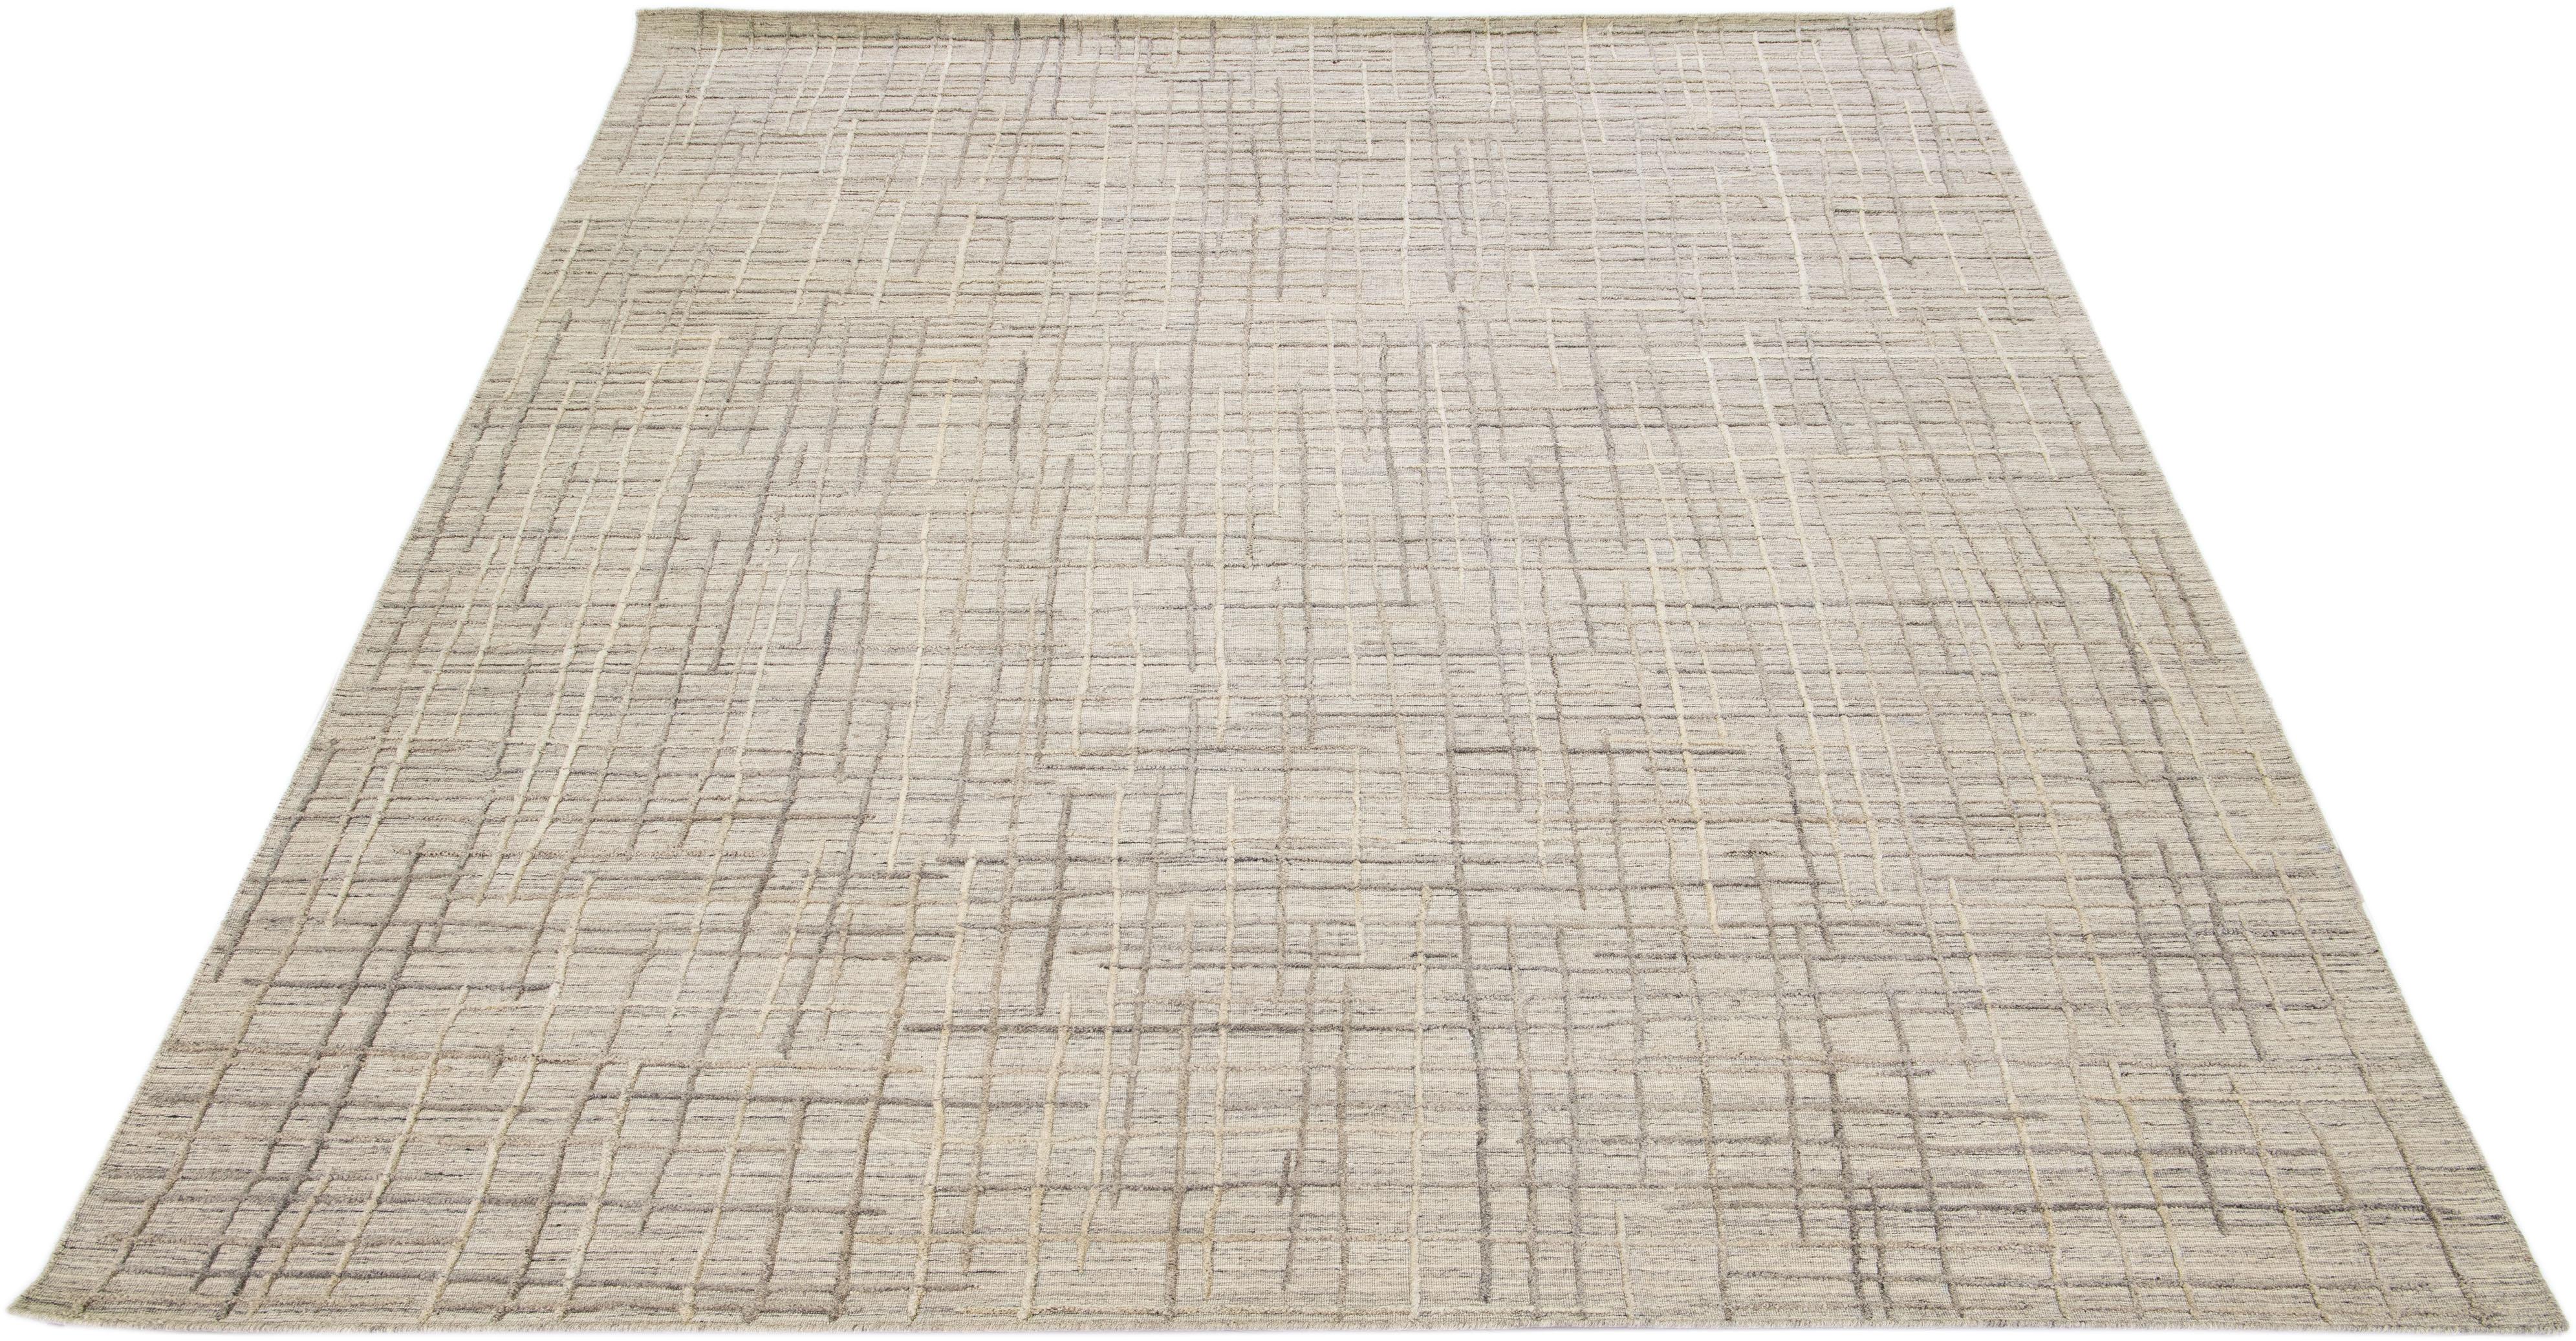 Beautiful Contemporary Thom Filicia Home Collection rugs. This Indian hand-tufted rug is made of wool and has a beige color field with gray accents all over the design.
Thom Filicia´s eye for exquisite detailing and beautiful texture shines through